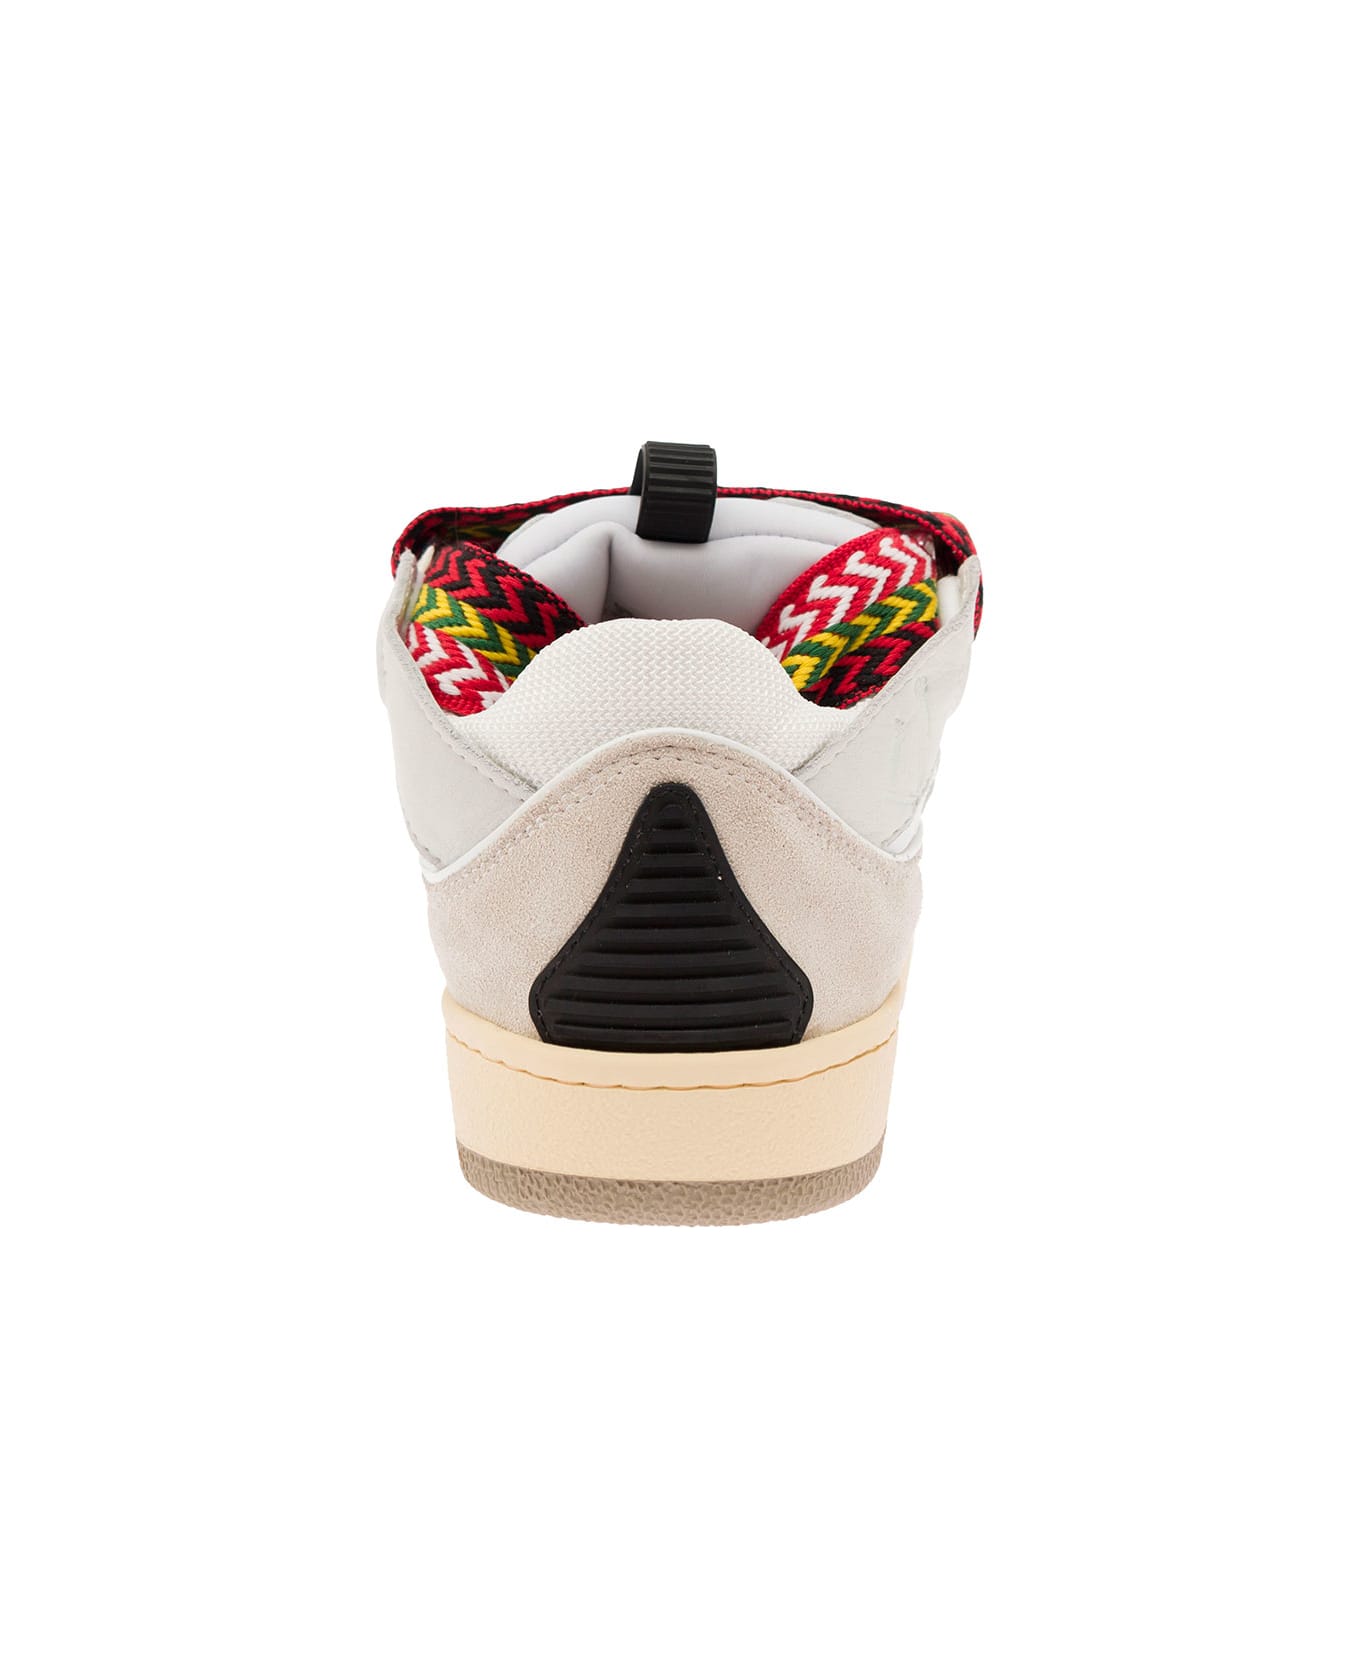 Lanvin Curb Leather Sneakers With Multicolor Laces Lanvin Woman - White